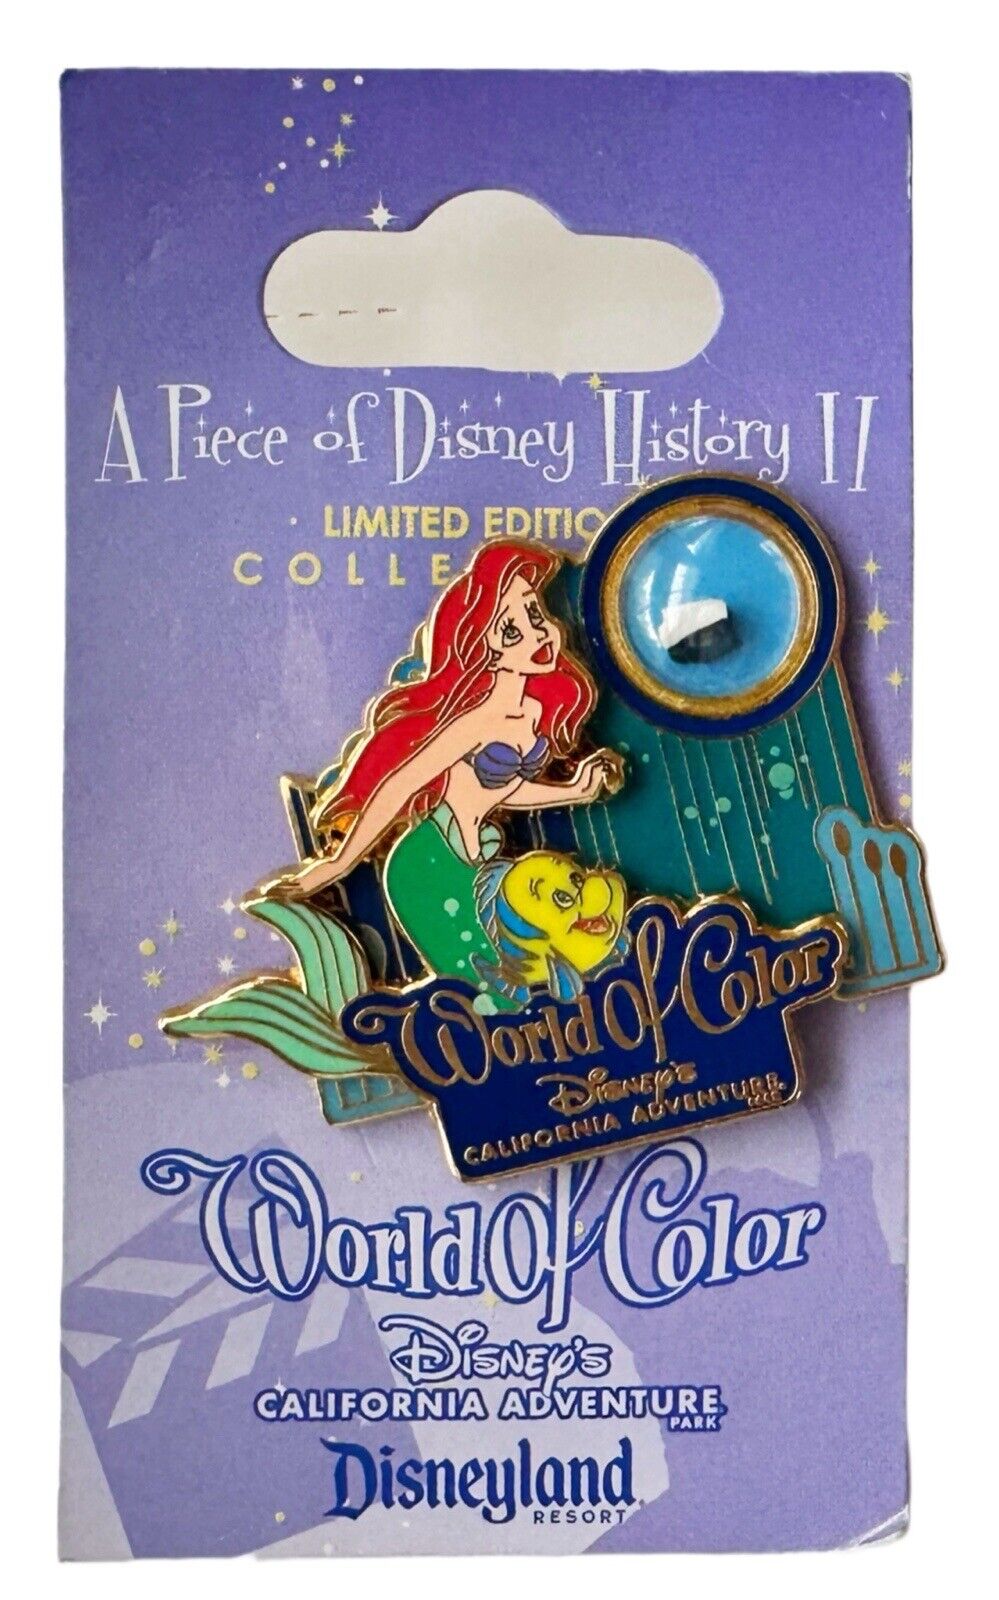 DLR Piece of Disney History Little Mermaid World of Color LE Pin